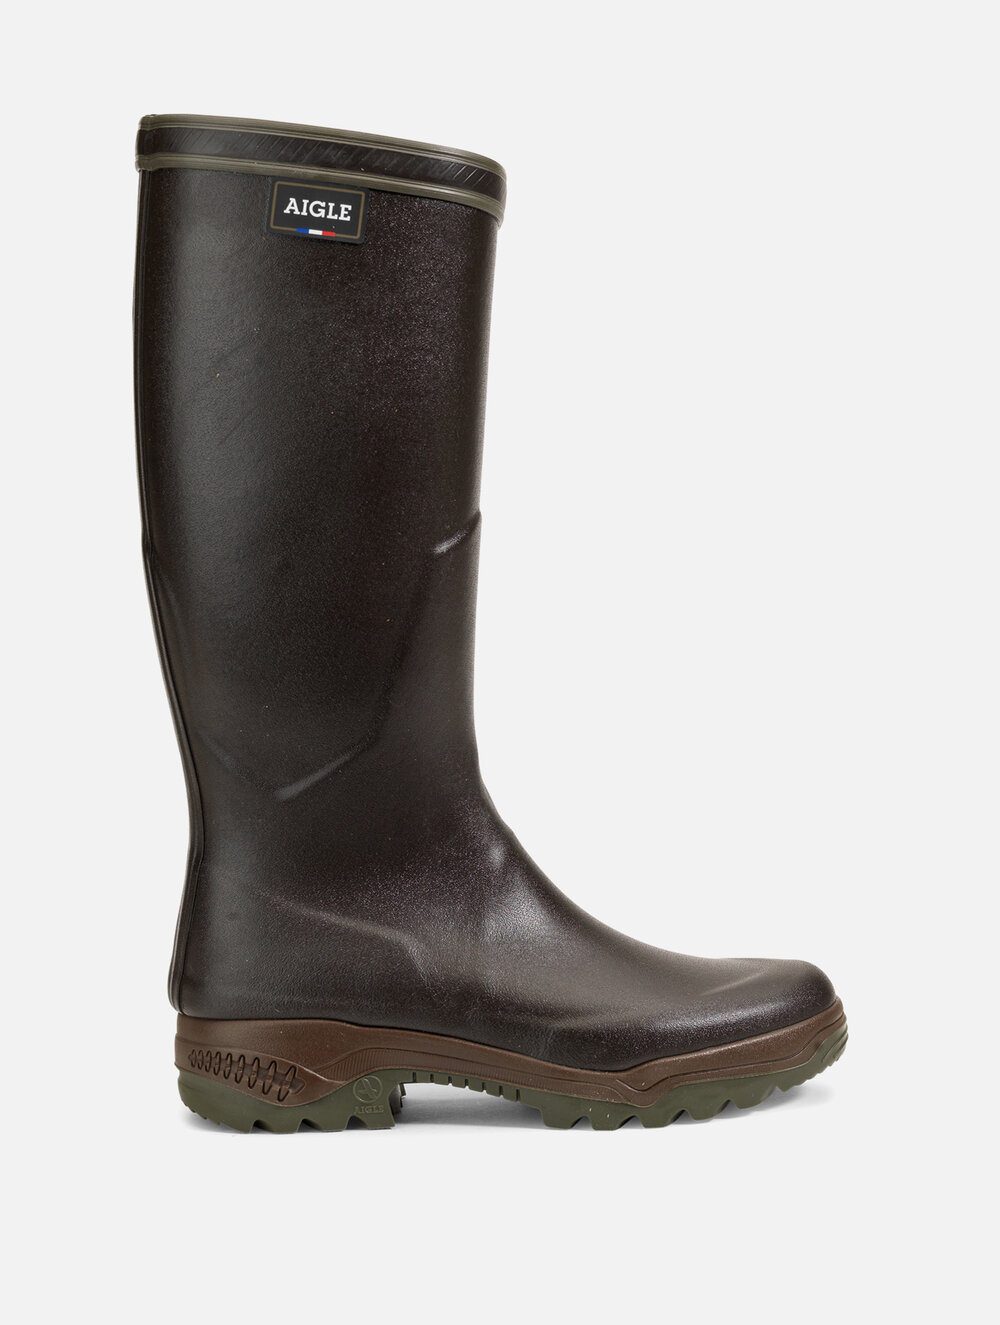 Aigle Parcours 2 Boots in Brown — UFO No More